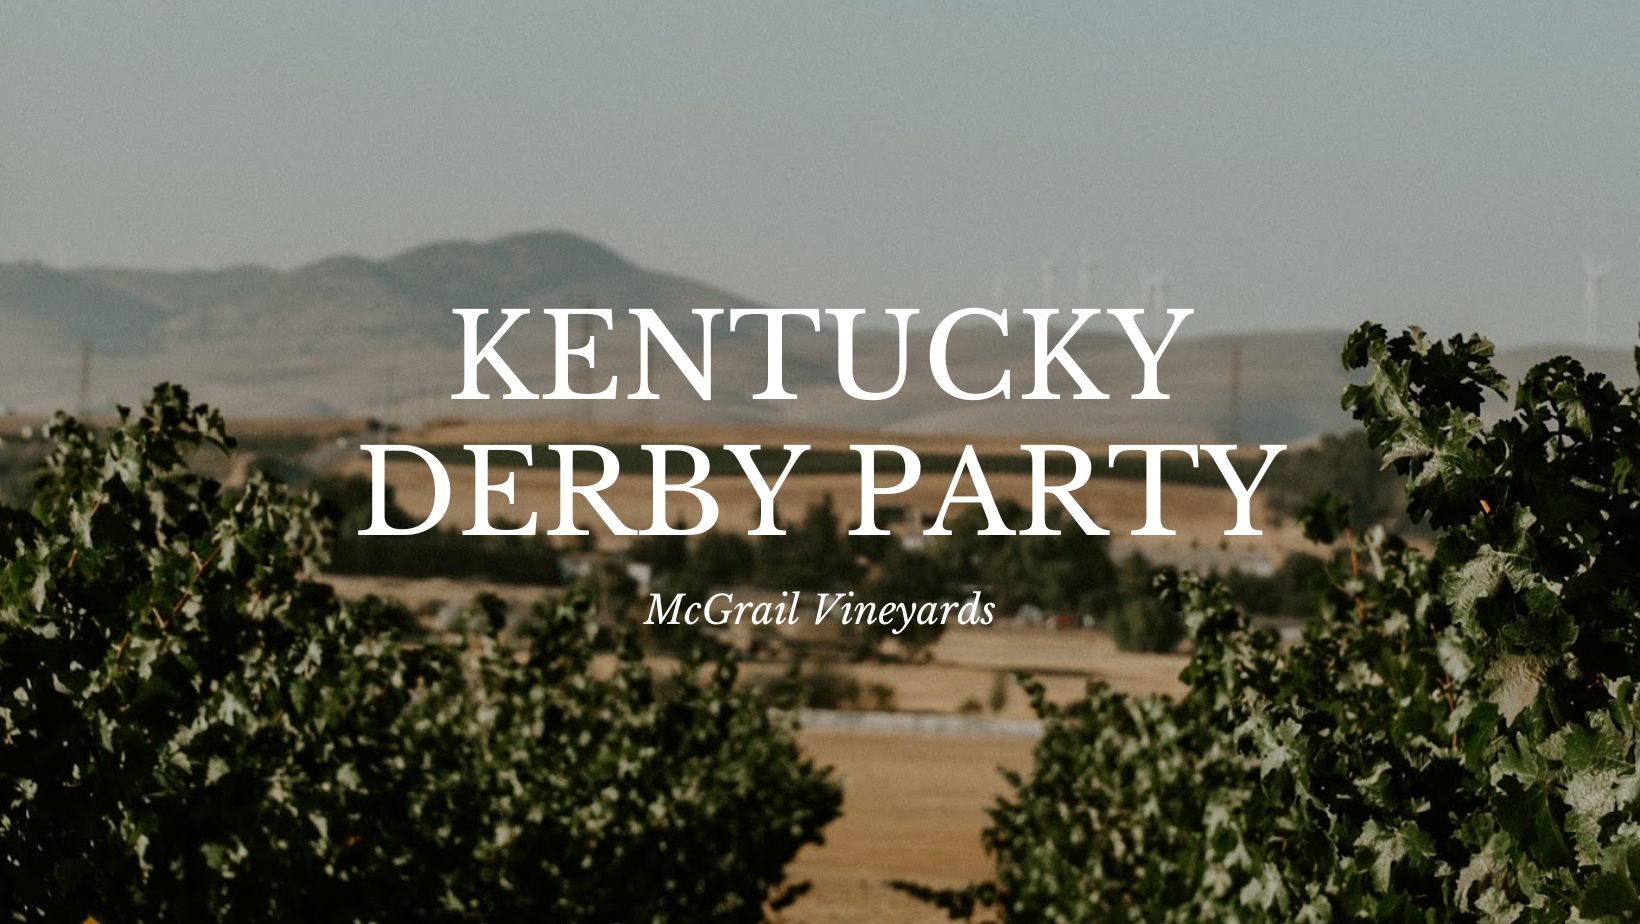 Kentucky Derby Party at McGrail Vineyards